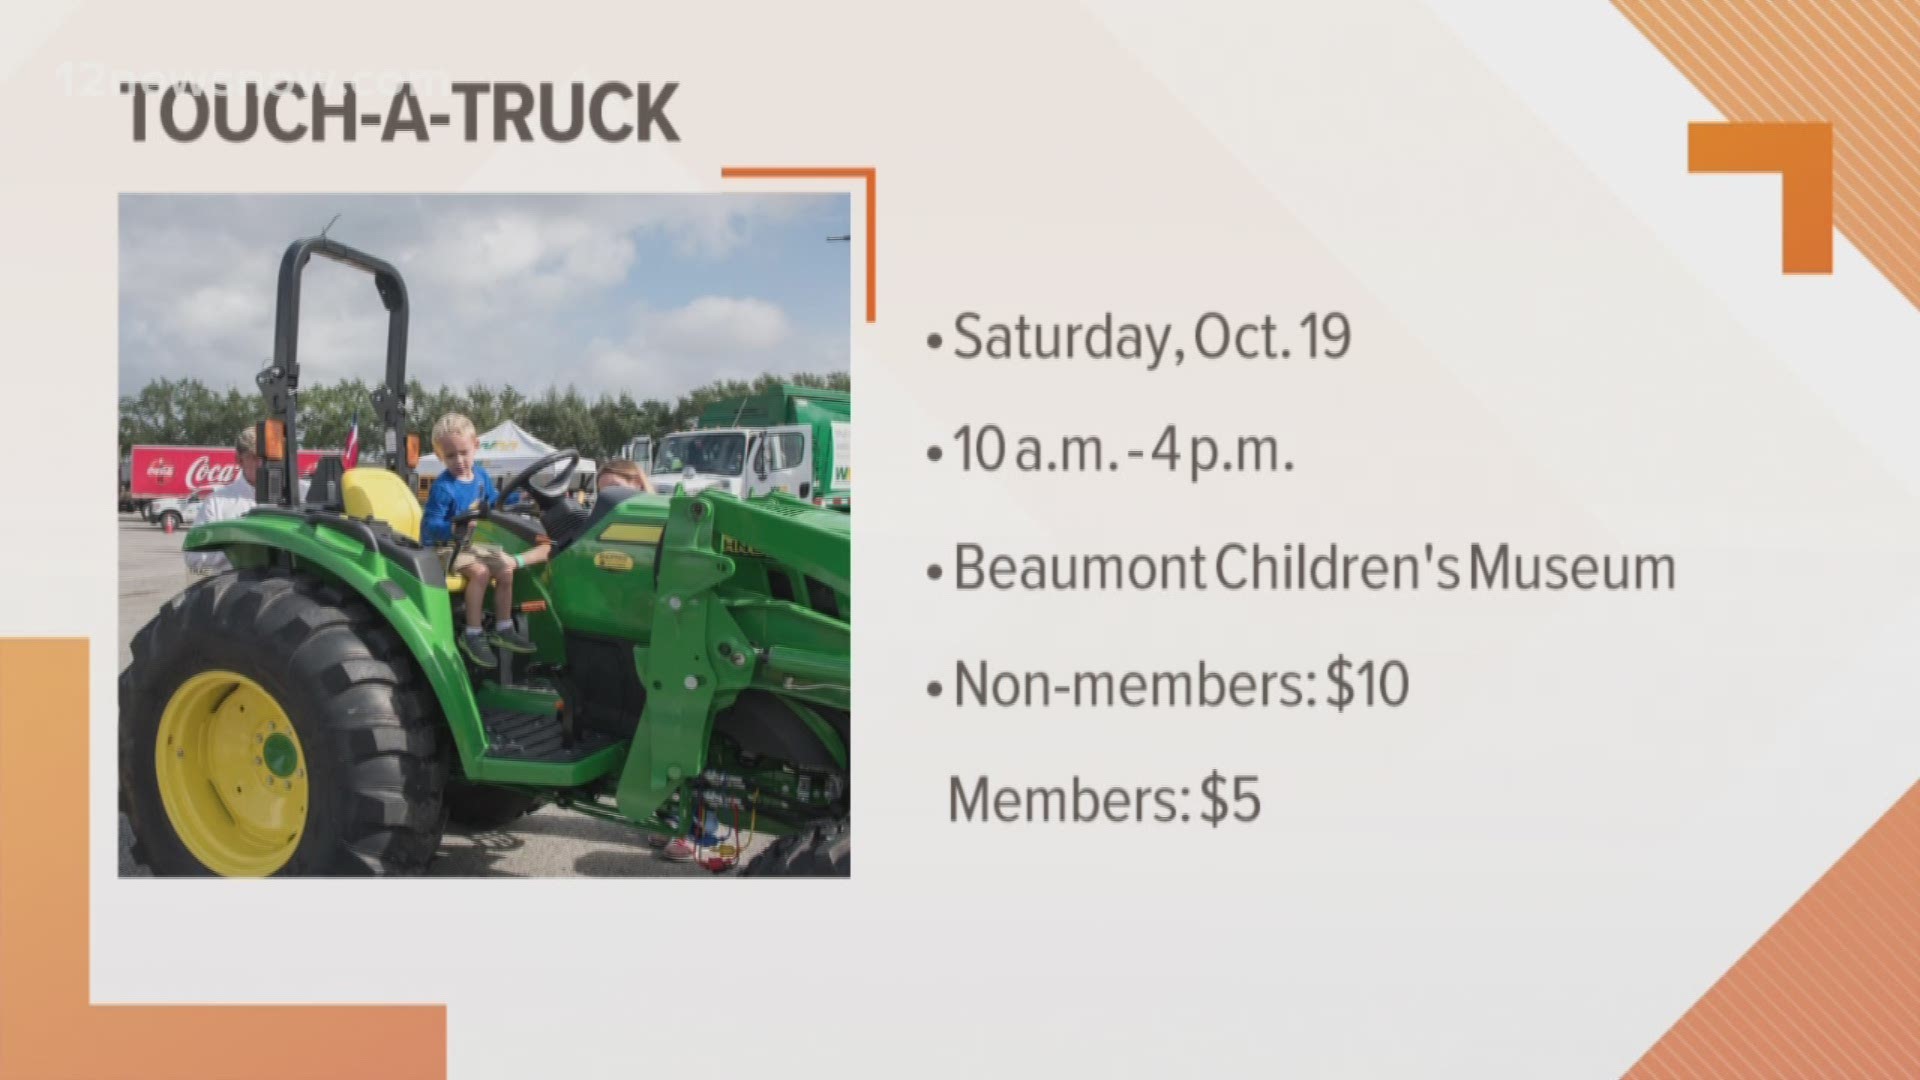 The Beaumont Children's Museum is hosting its 9th annual Touch-A-Truck fundraiser.